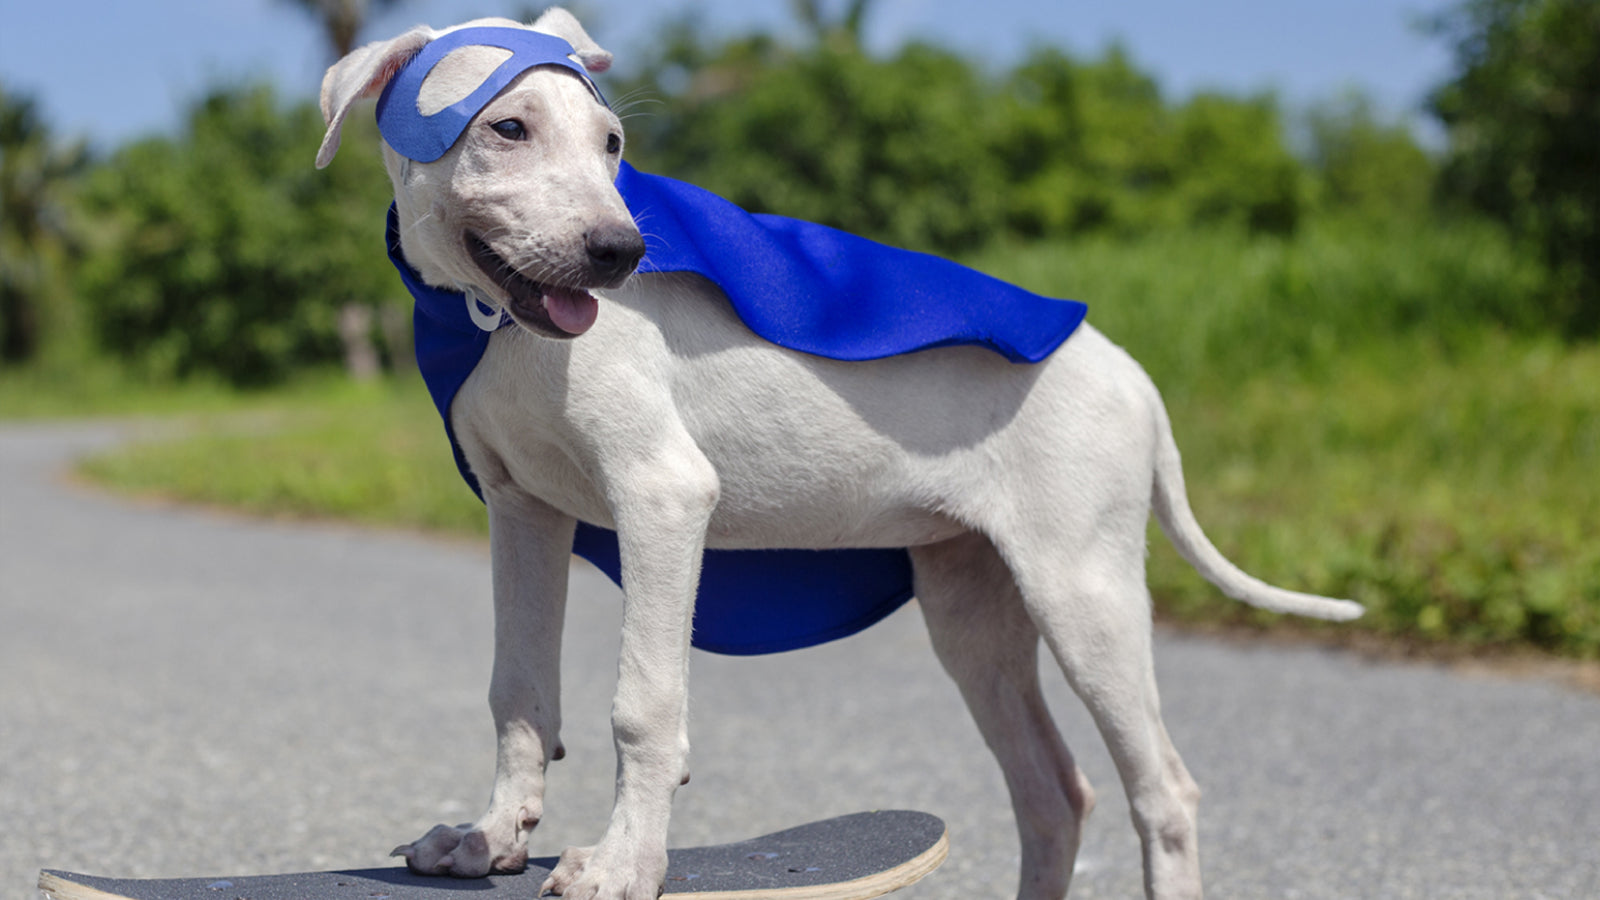 A white dog stands on a skateboard wearing a royal blue superhero halloween costume